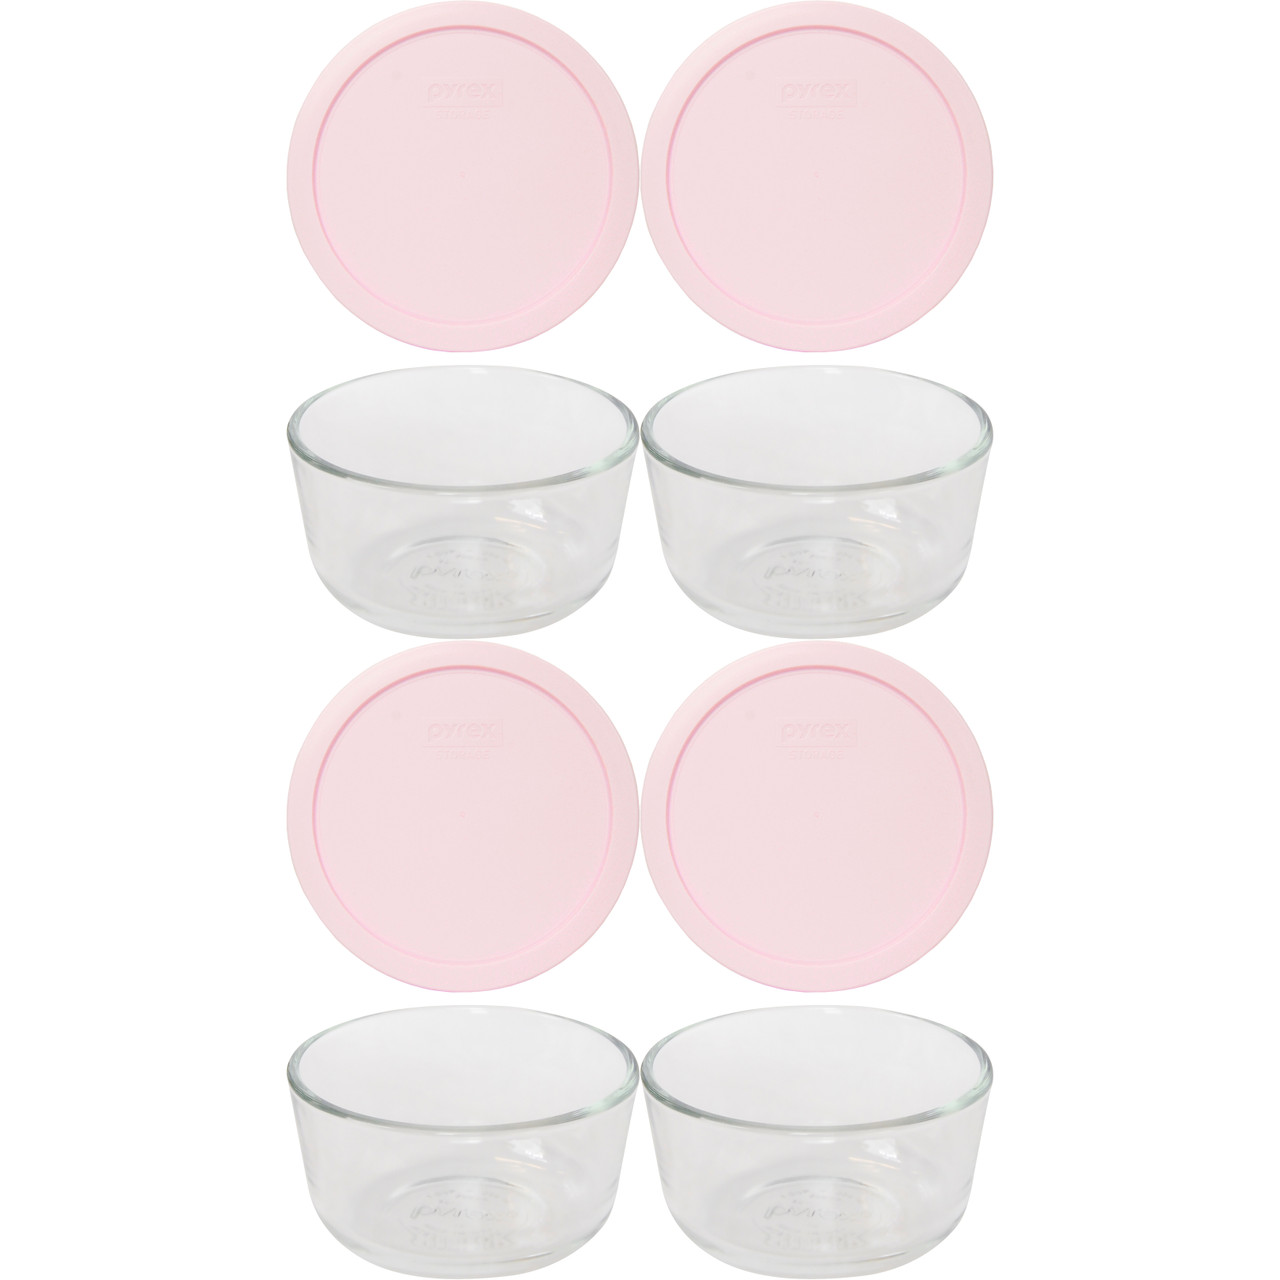 Pyrex 7203 7-Cup Round Glass Food Storage Bowl with 7402-PC Loring Pink Plastic Lid Cover (4-Pack)